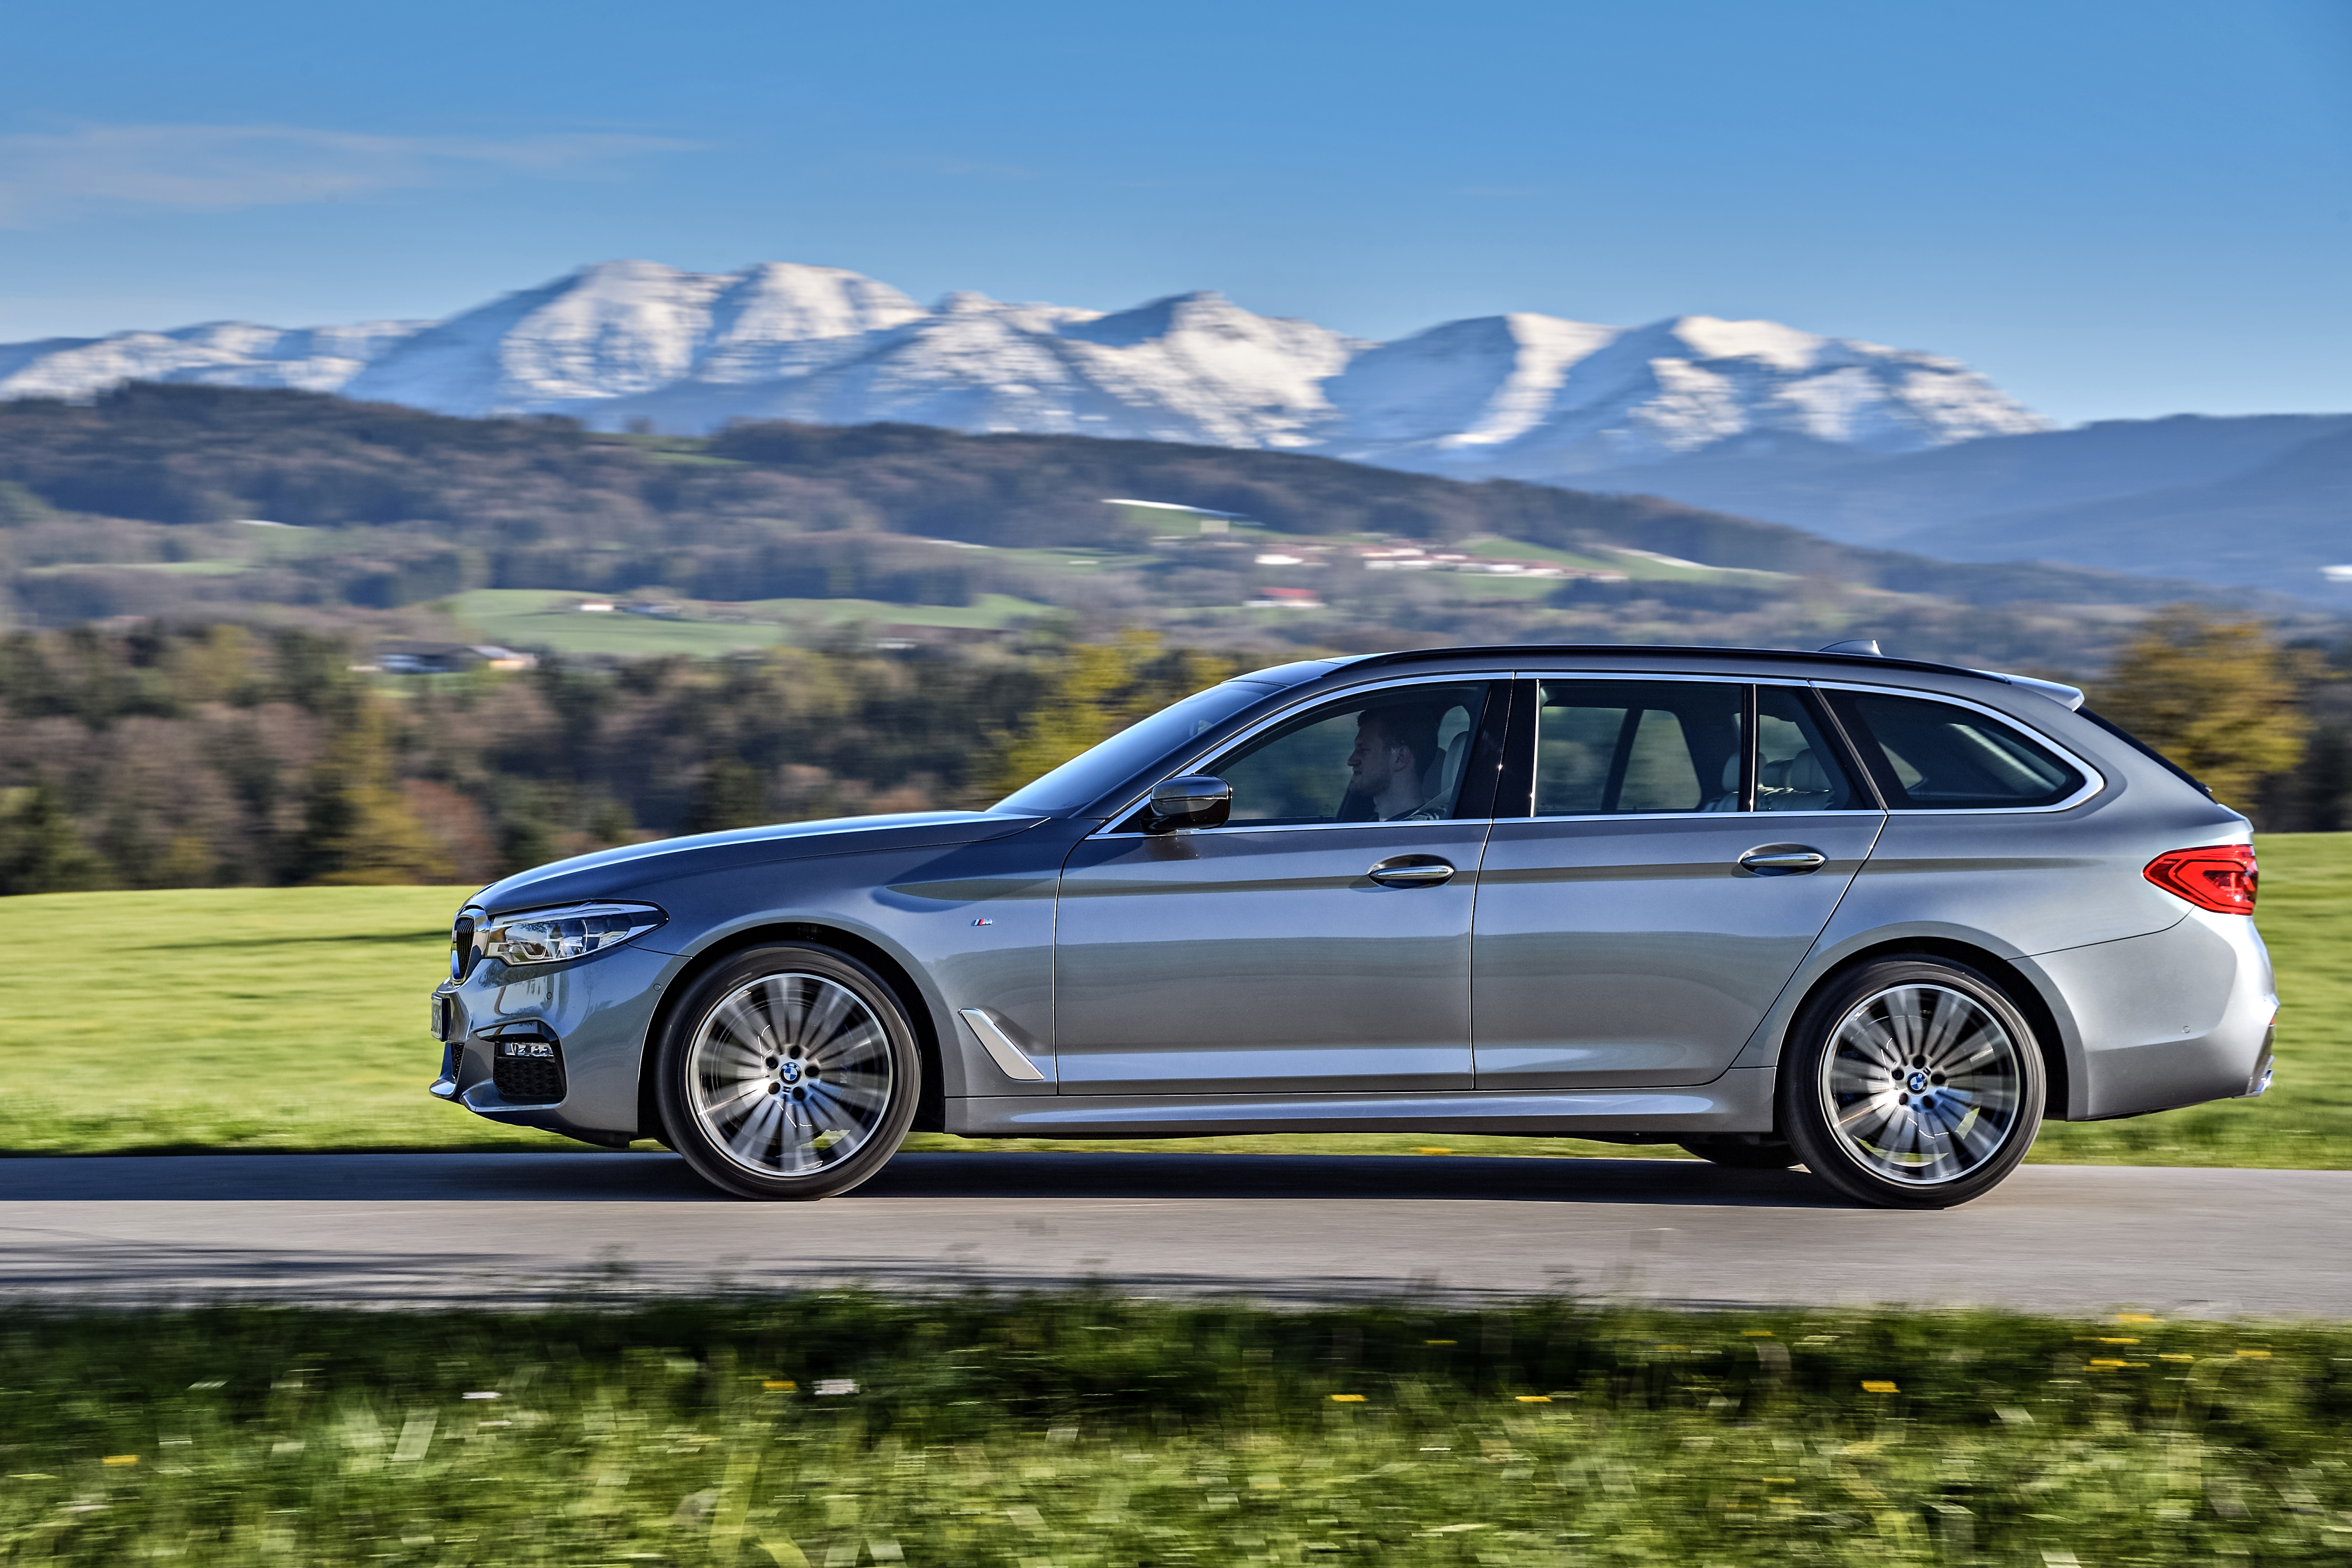 Introducing the All New BMW 5 Series Touring (G31) - BMW 5-Series